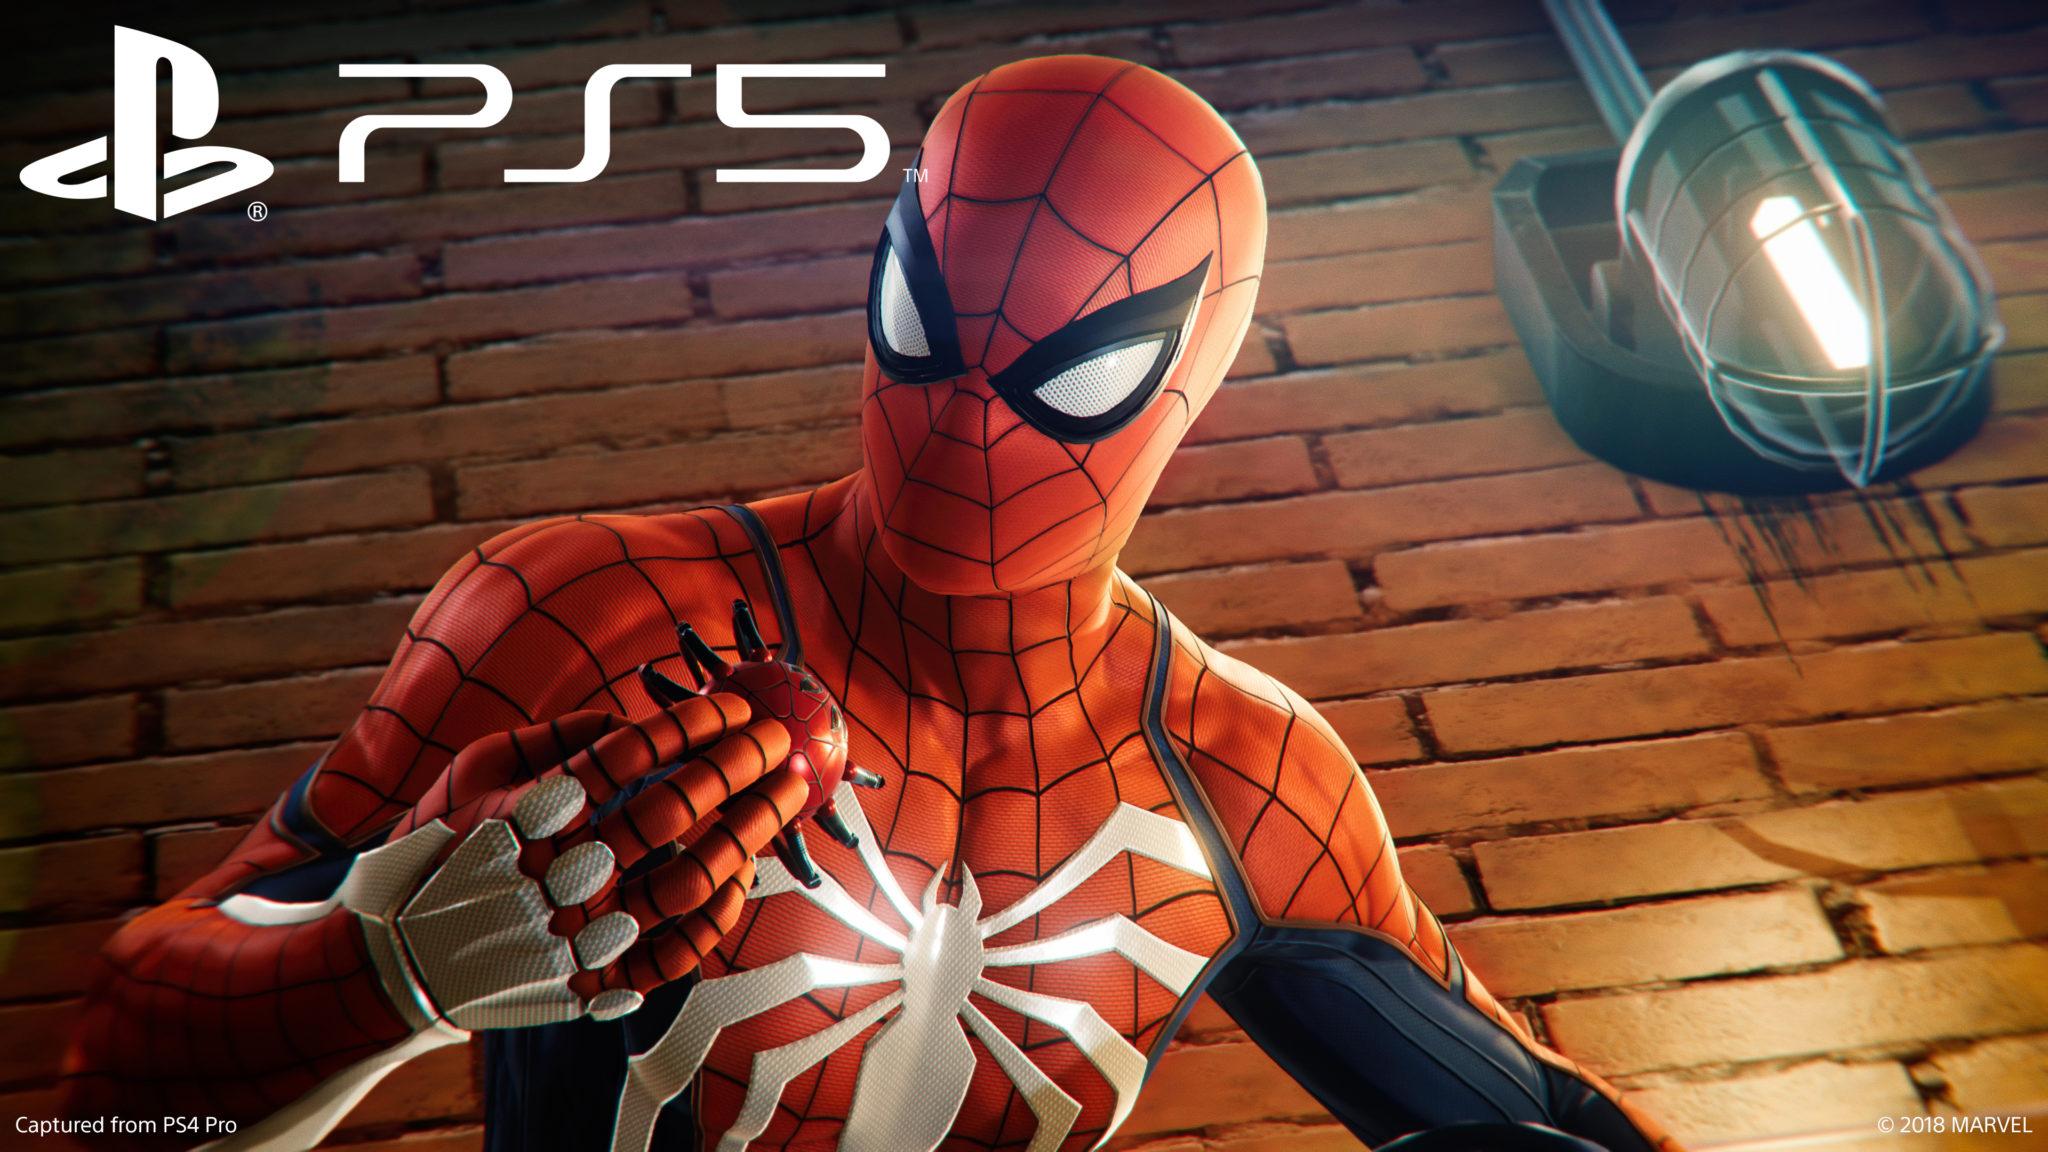 Spider-Man Remastered PS4 to PS5 save transfer now available